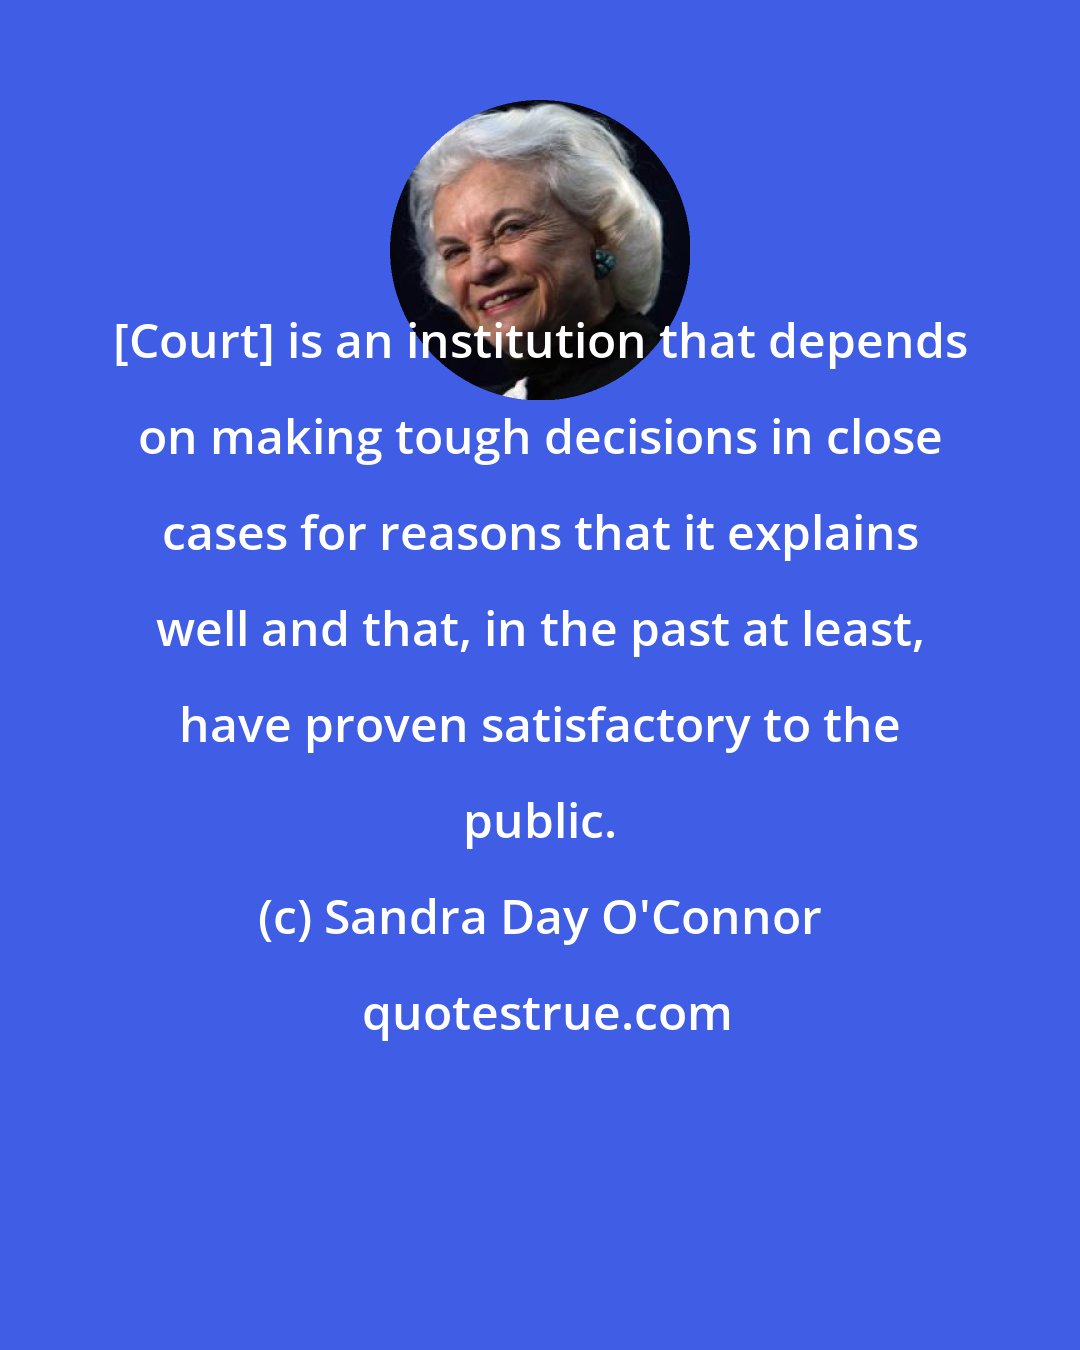 Sandra Day O'Connor: [Court] is an institution that depends on making tough decisions in close cases for reasons that it explains well and that, in the past at least, have proven satisfactory to the public.